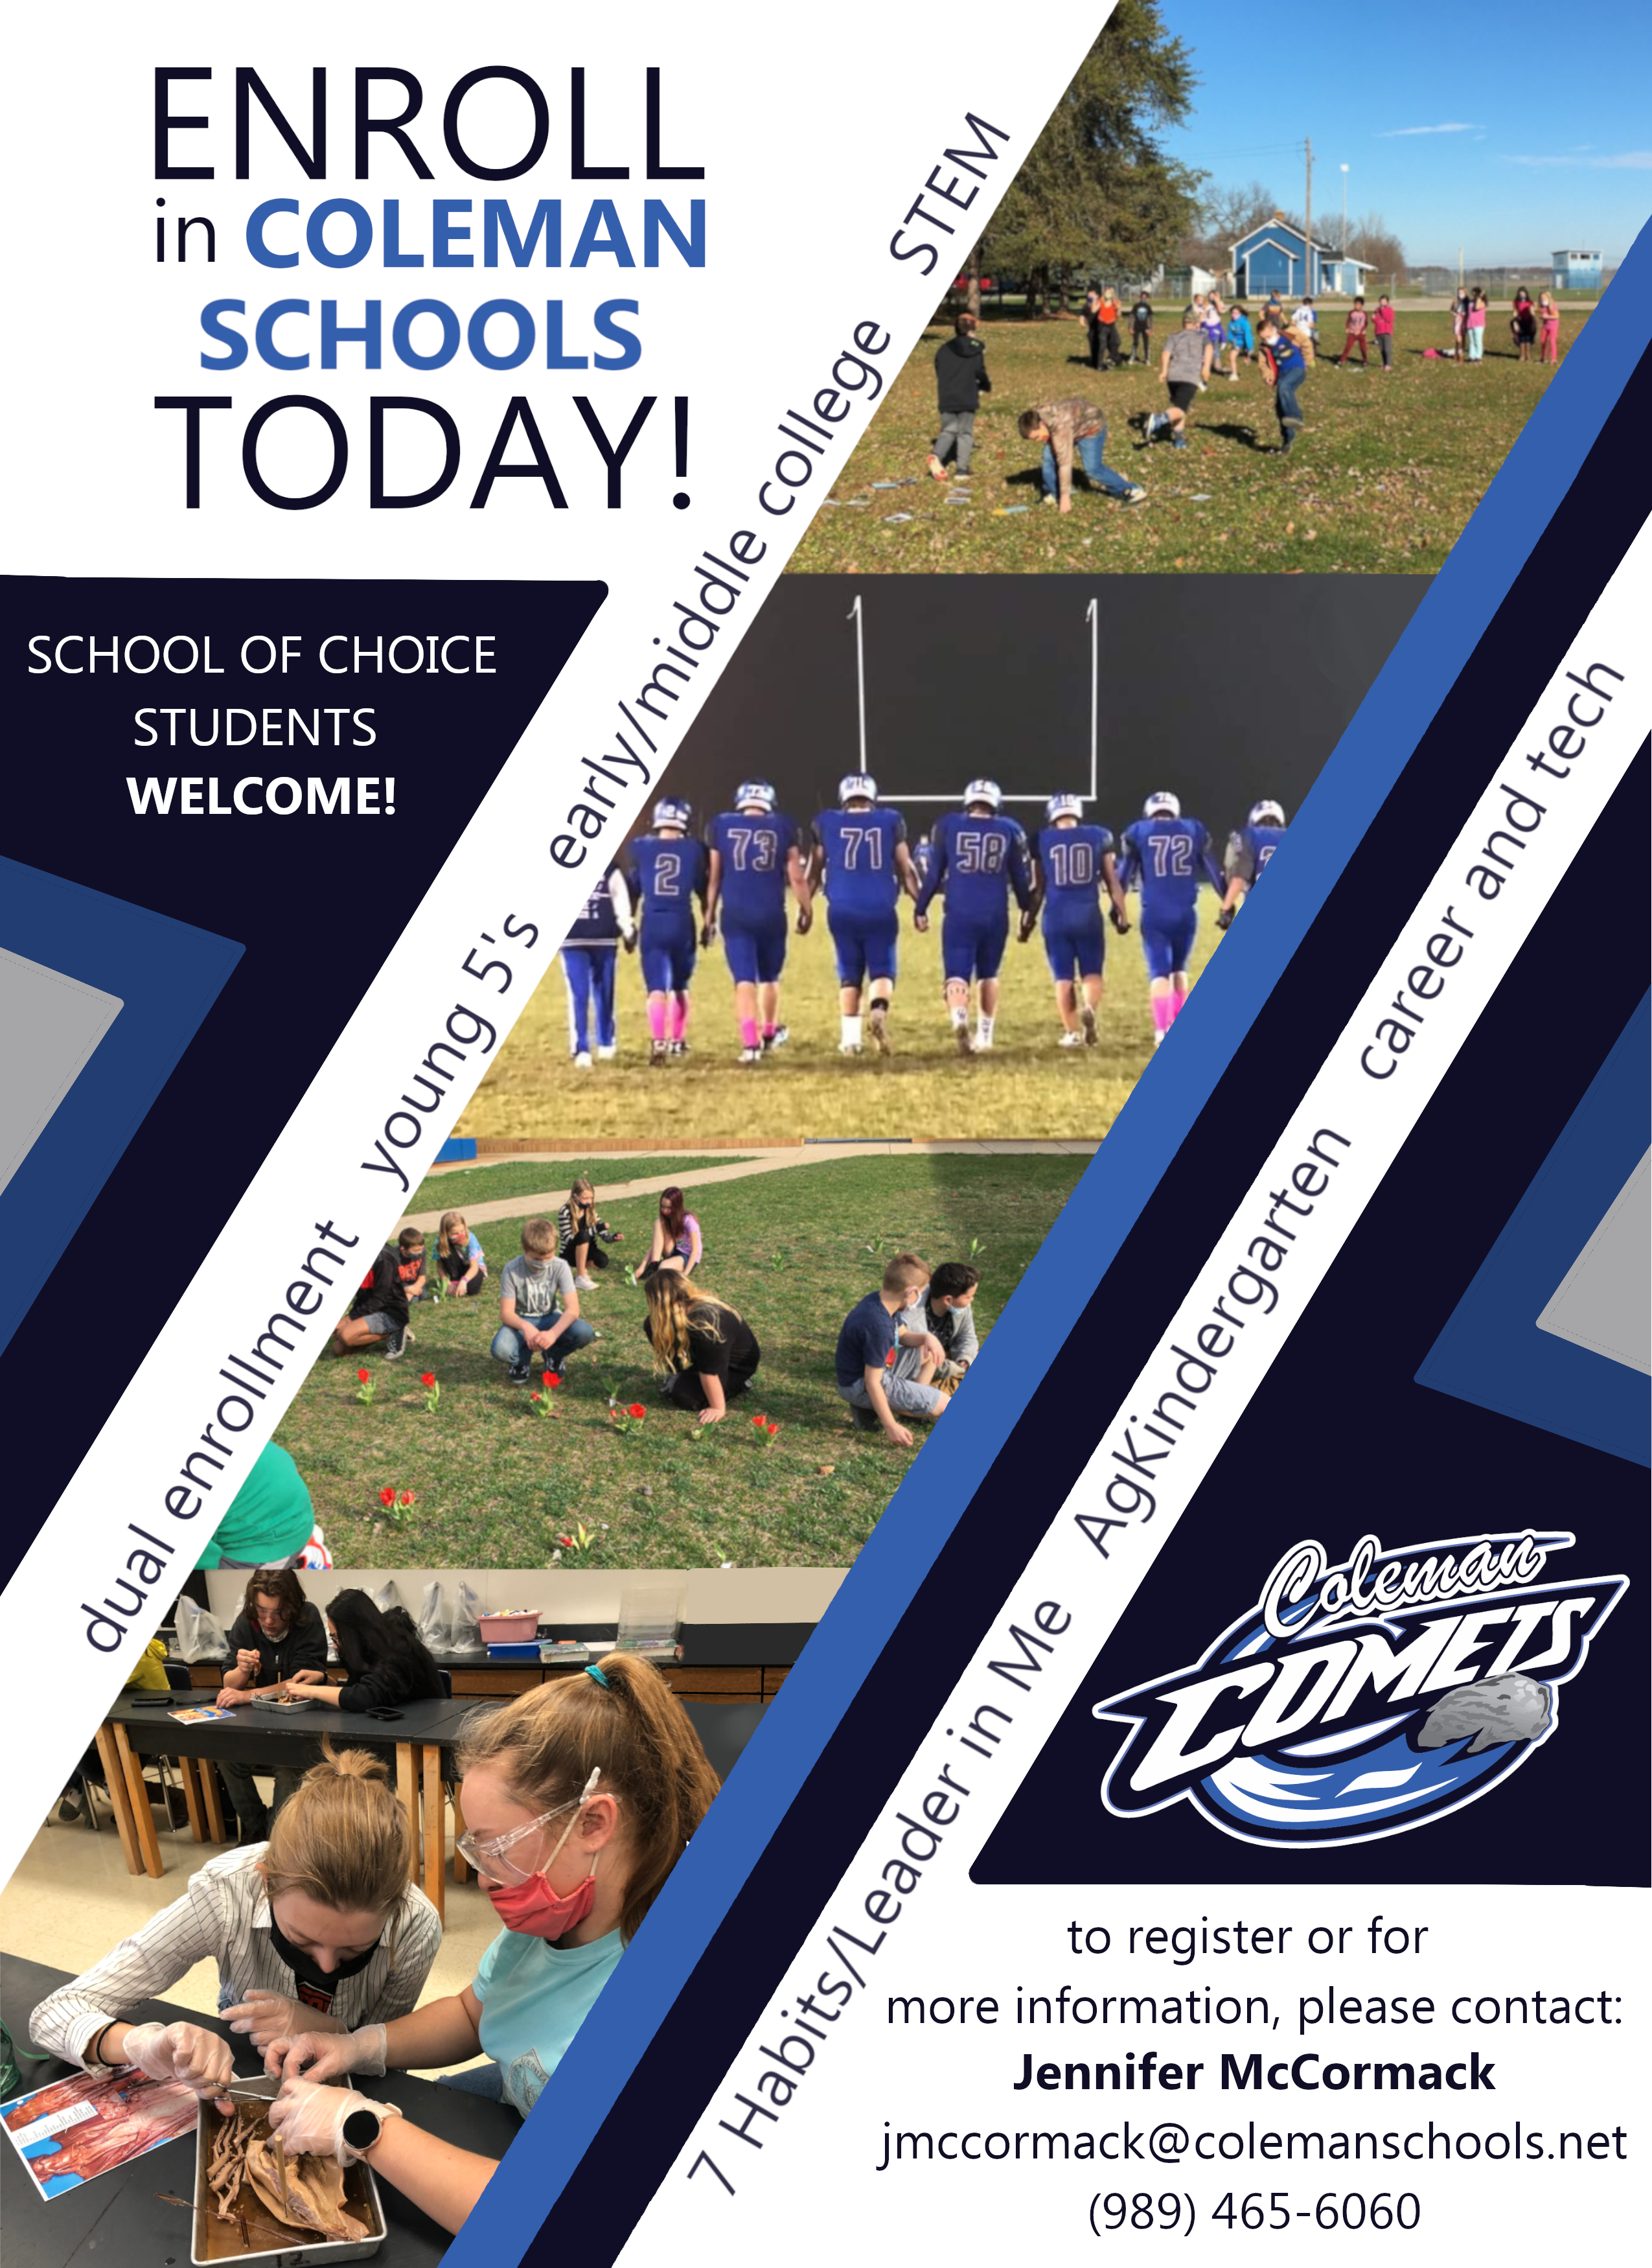 Enroll at Coleman Community today! School of Choice Students Welcome! To register or for more information, please contact: Jennifer McCormack jmccormack@colemanschools.net (989) 465-6060 